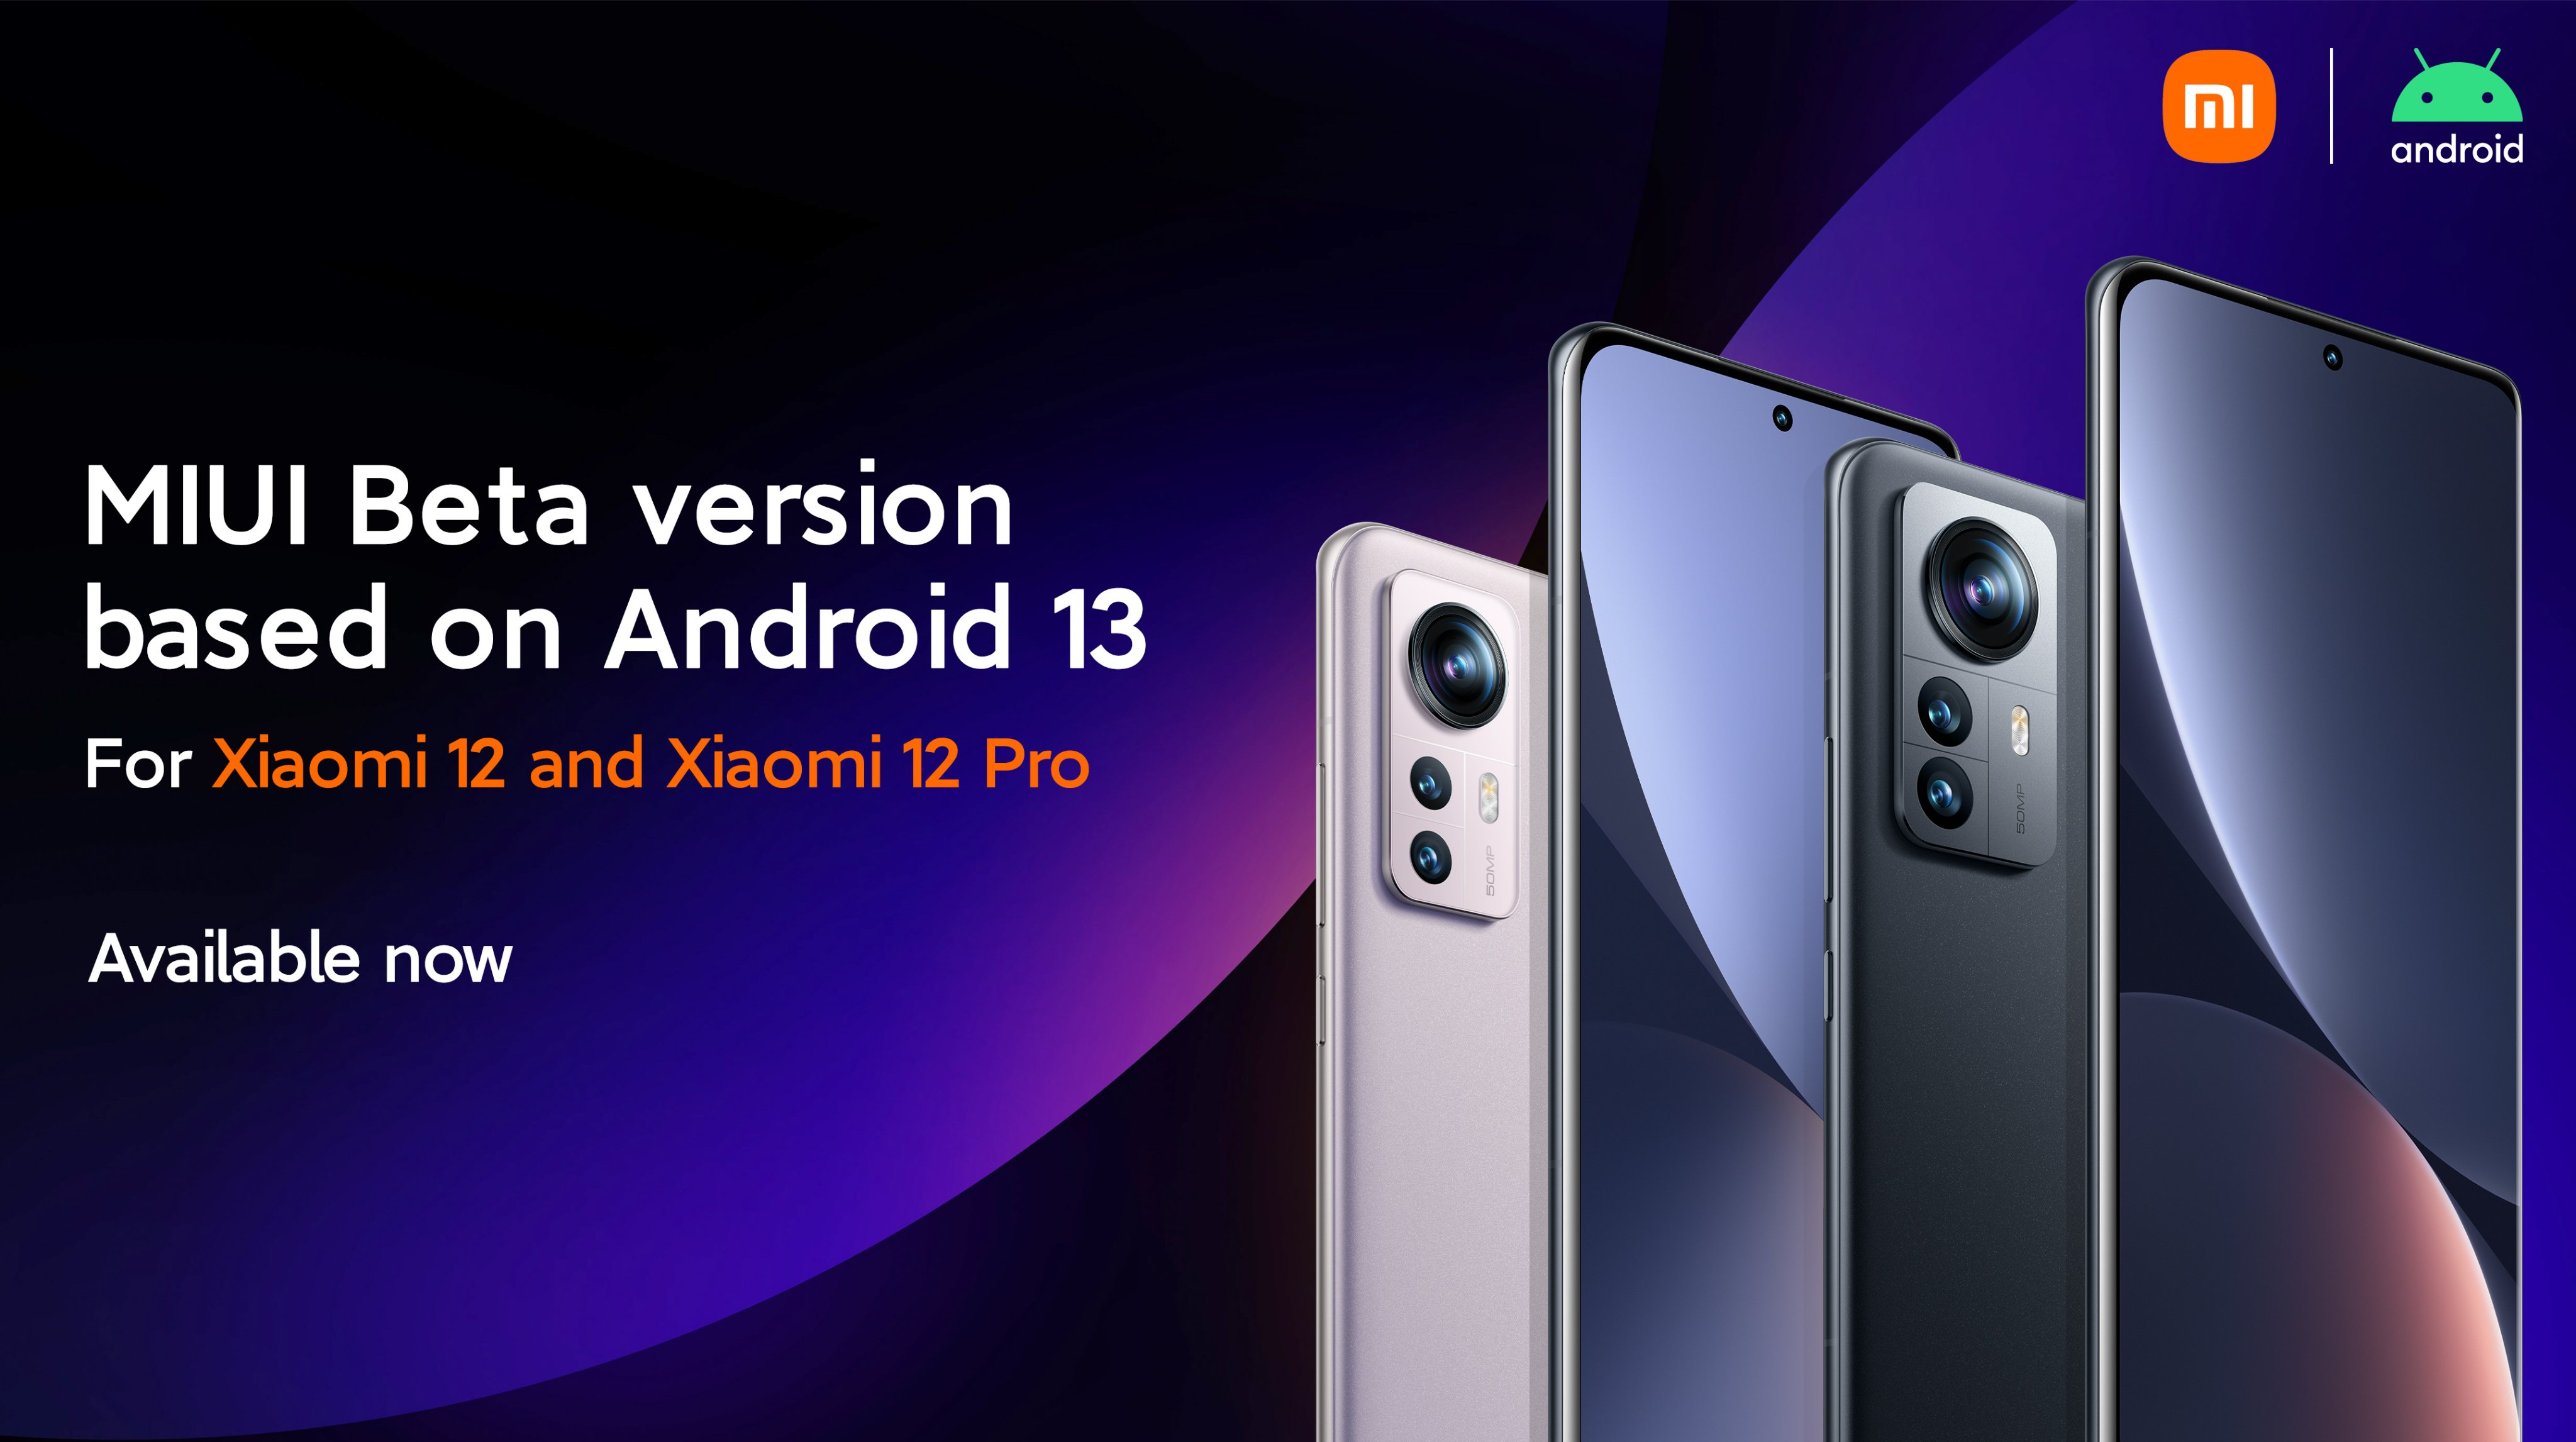 Xiaomi 12 and Xiaomi 12 Pro received a beta version of MIUI 13 based on Android 13